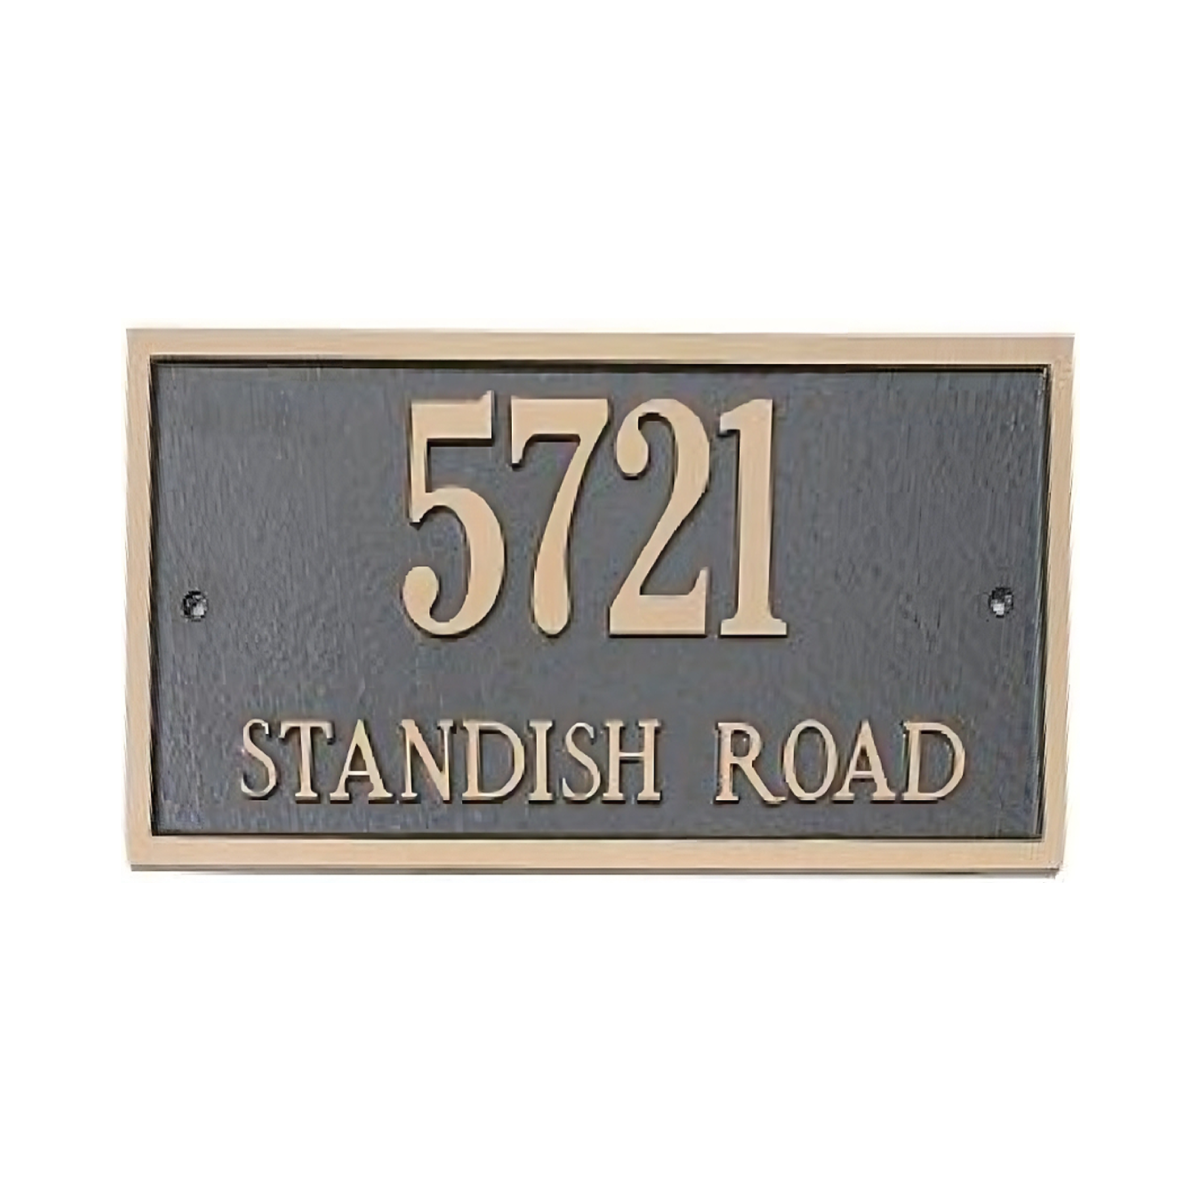 Majestic Solid Brass Rectangle Address Plaques Product Image